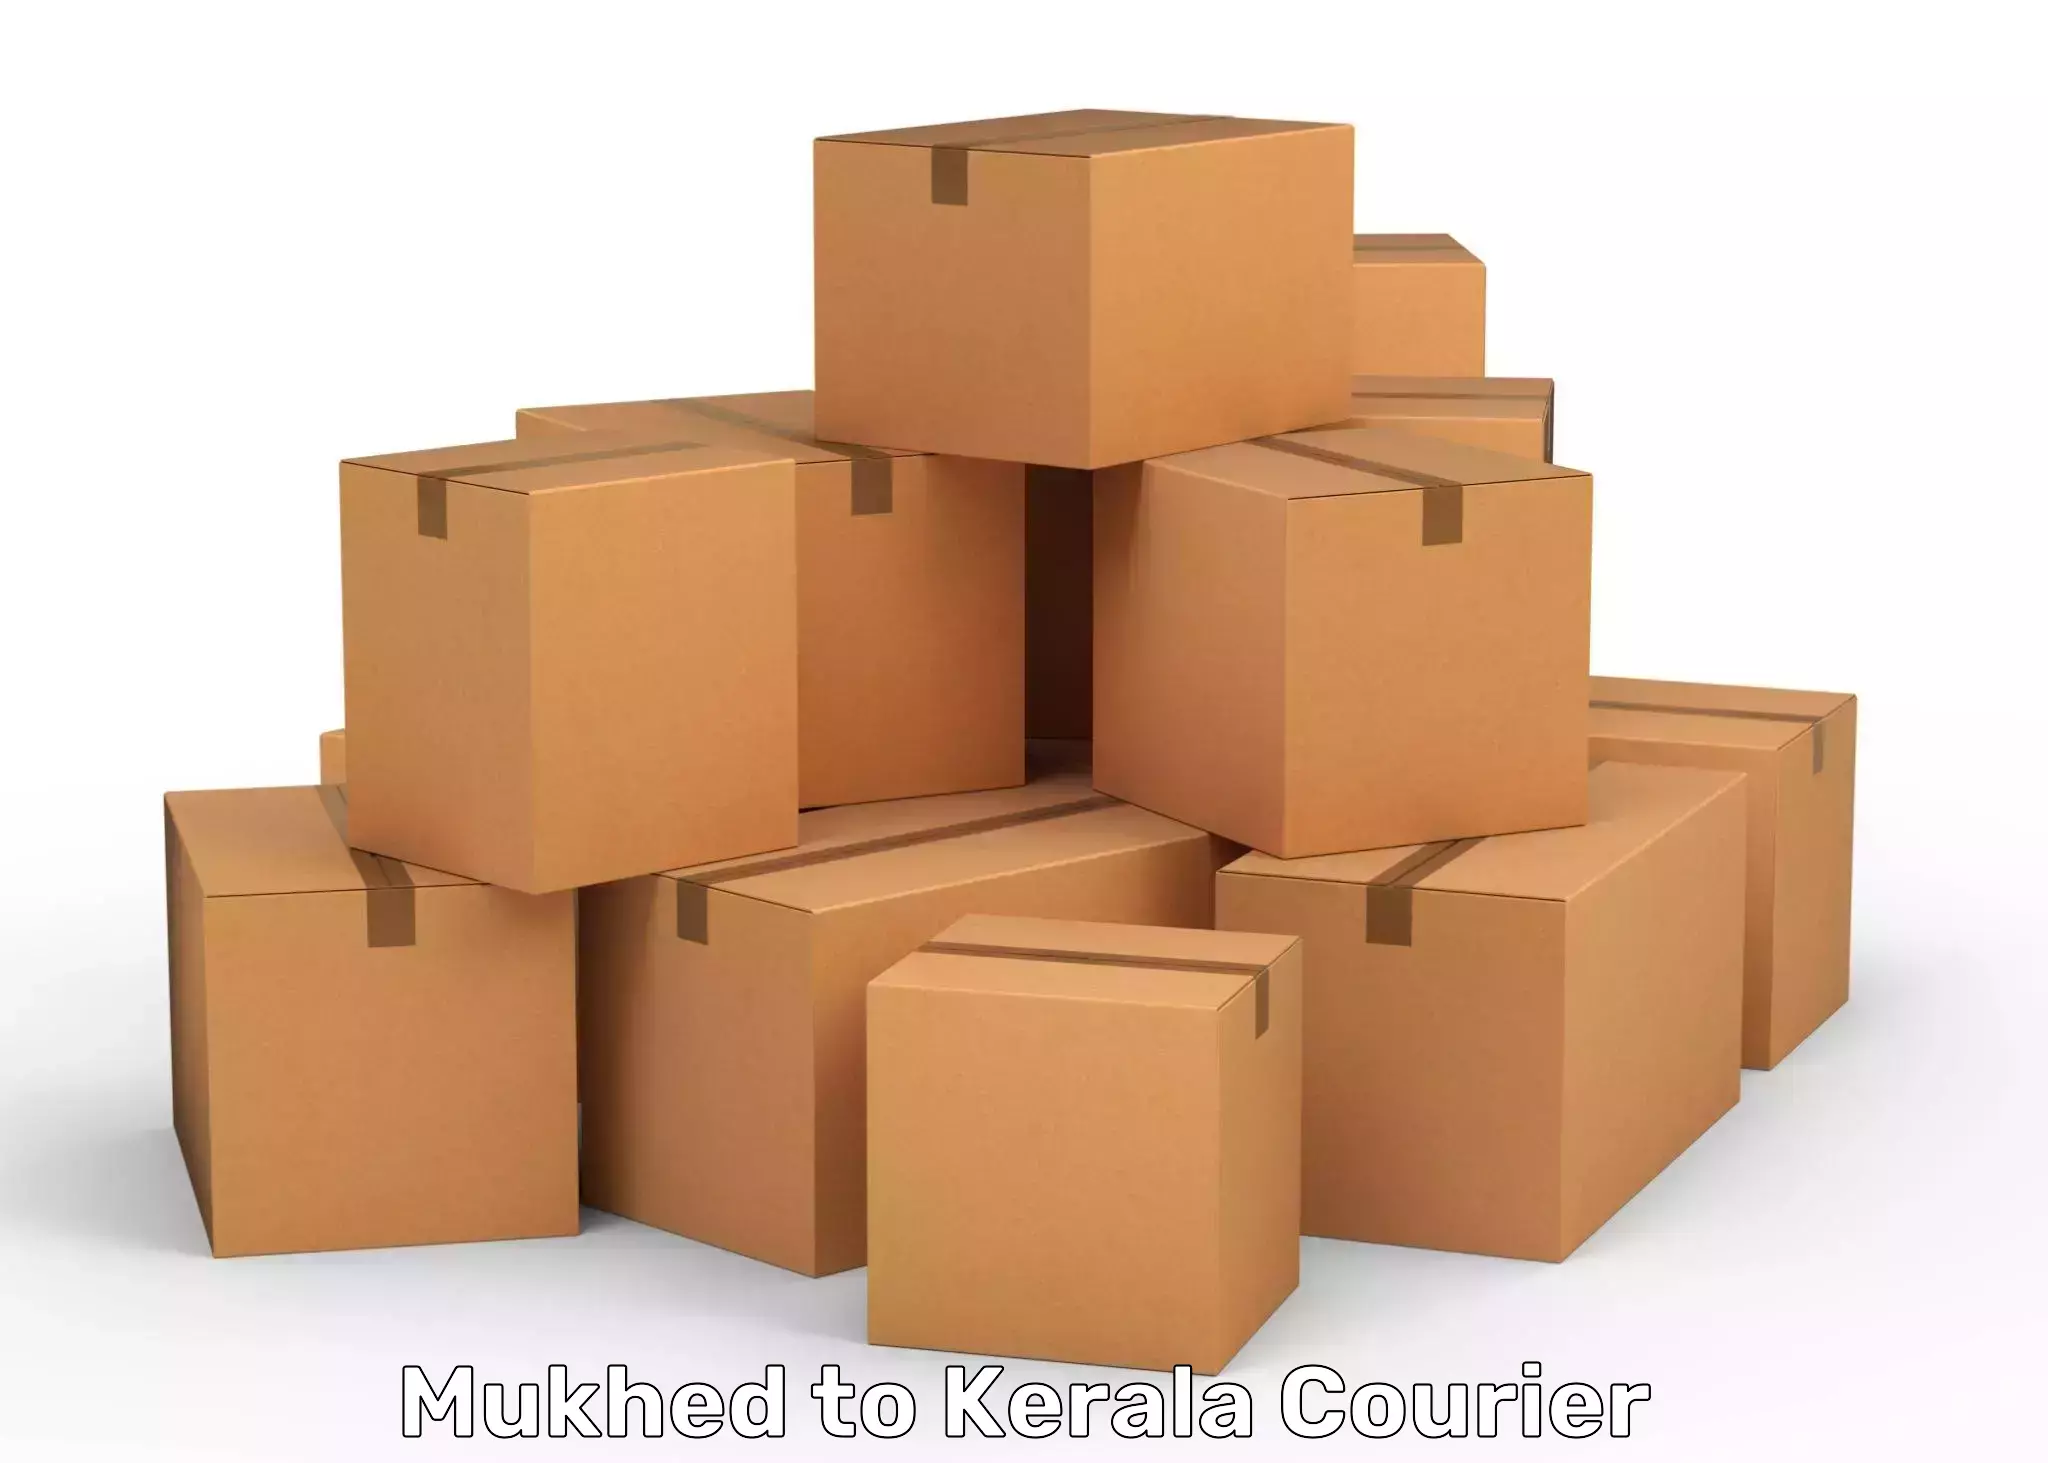 Global shipping solutions Mukhed to Kerala